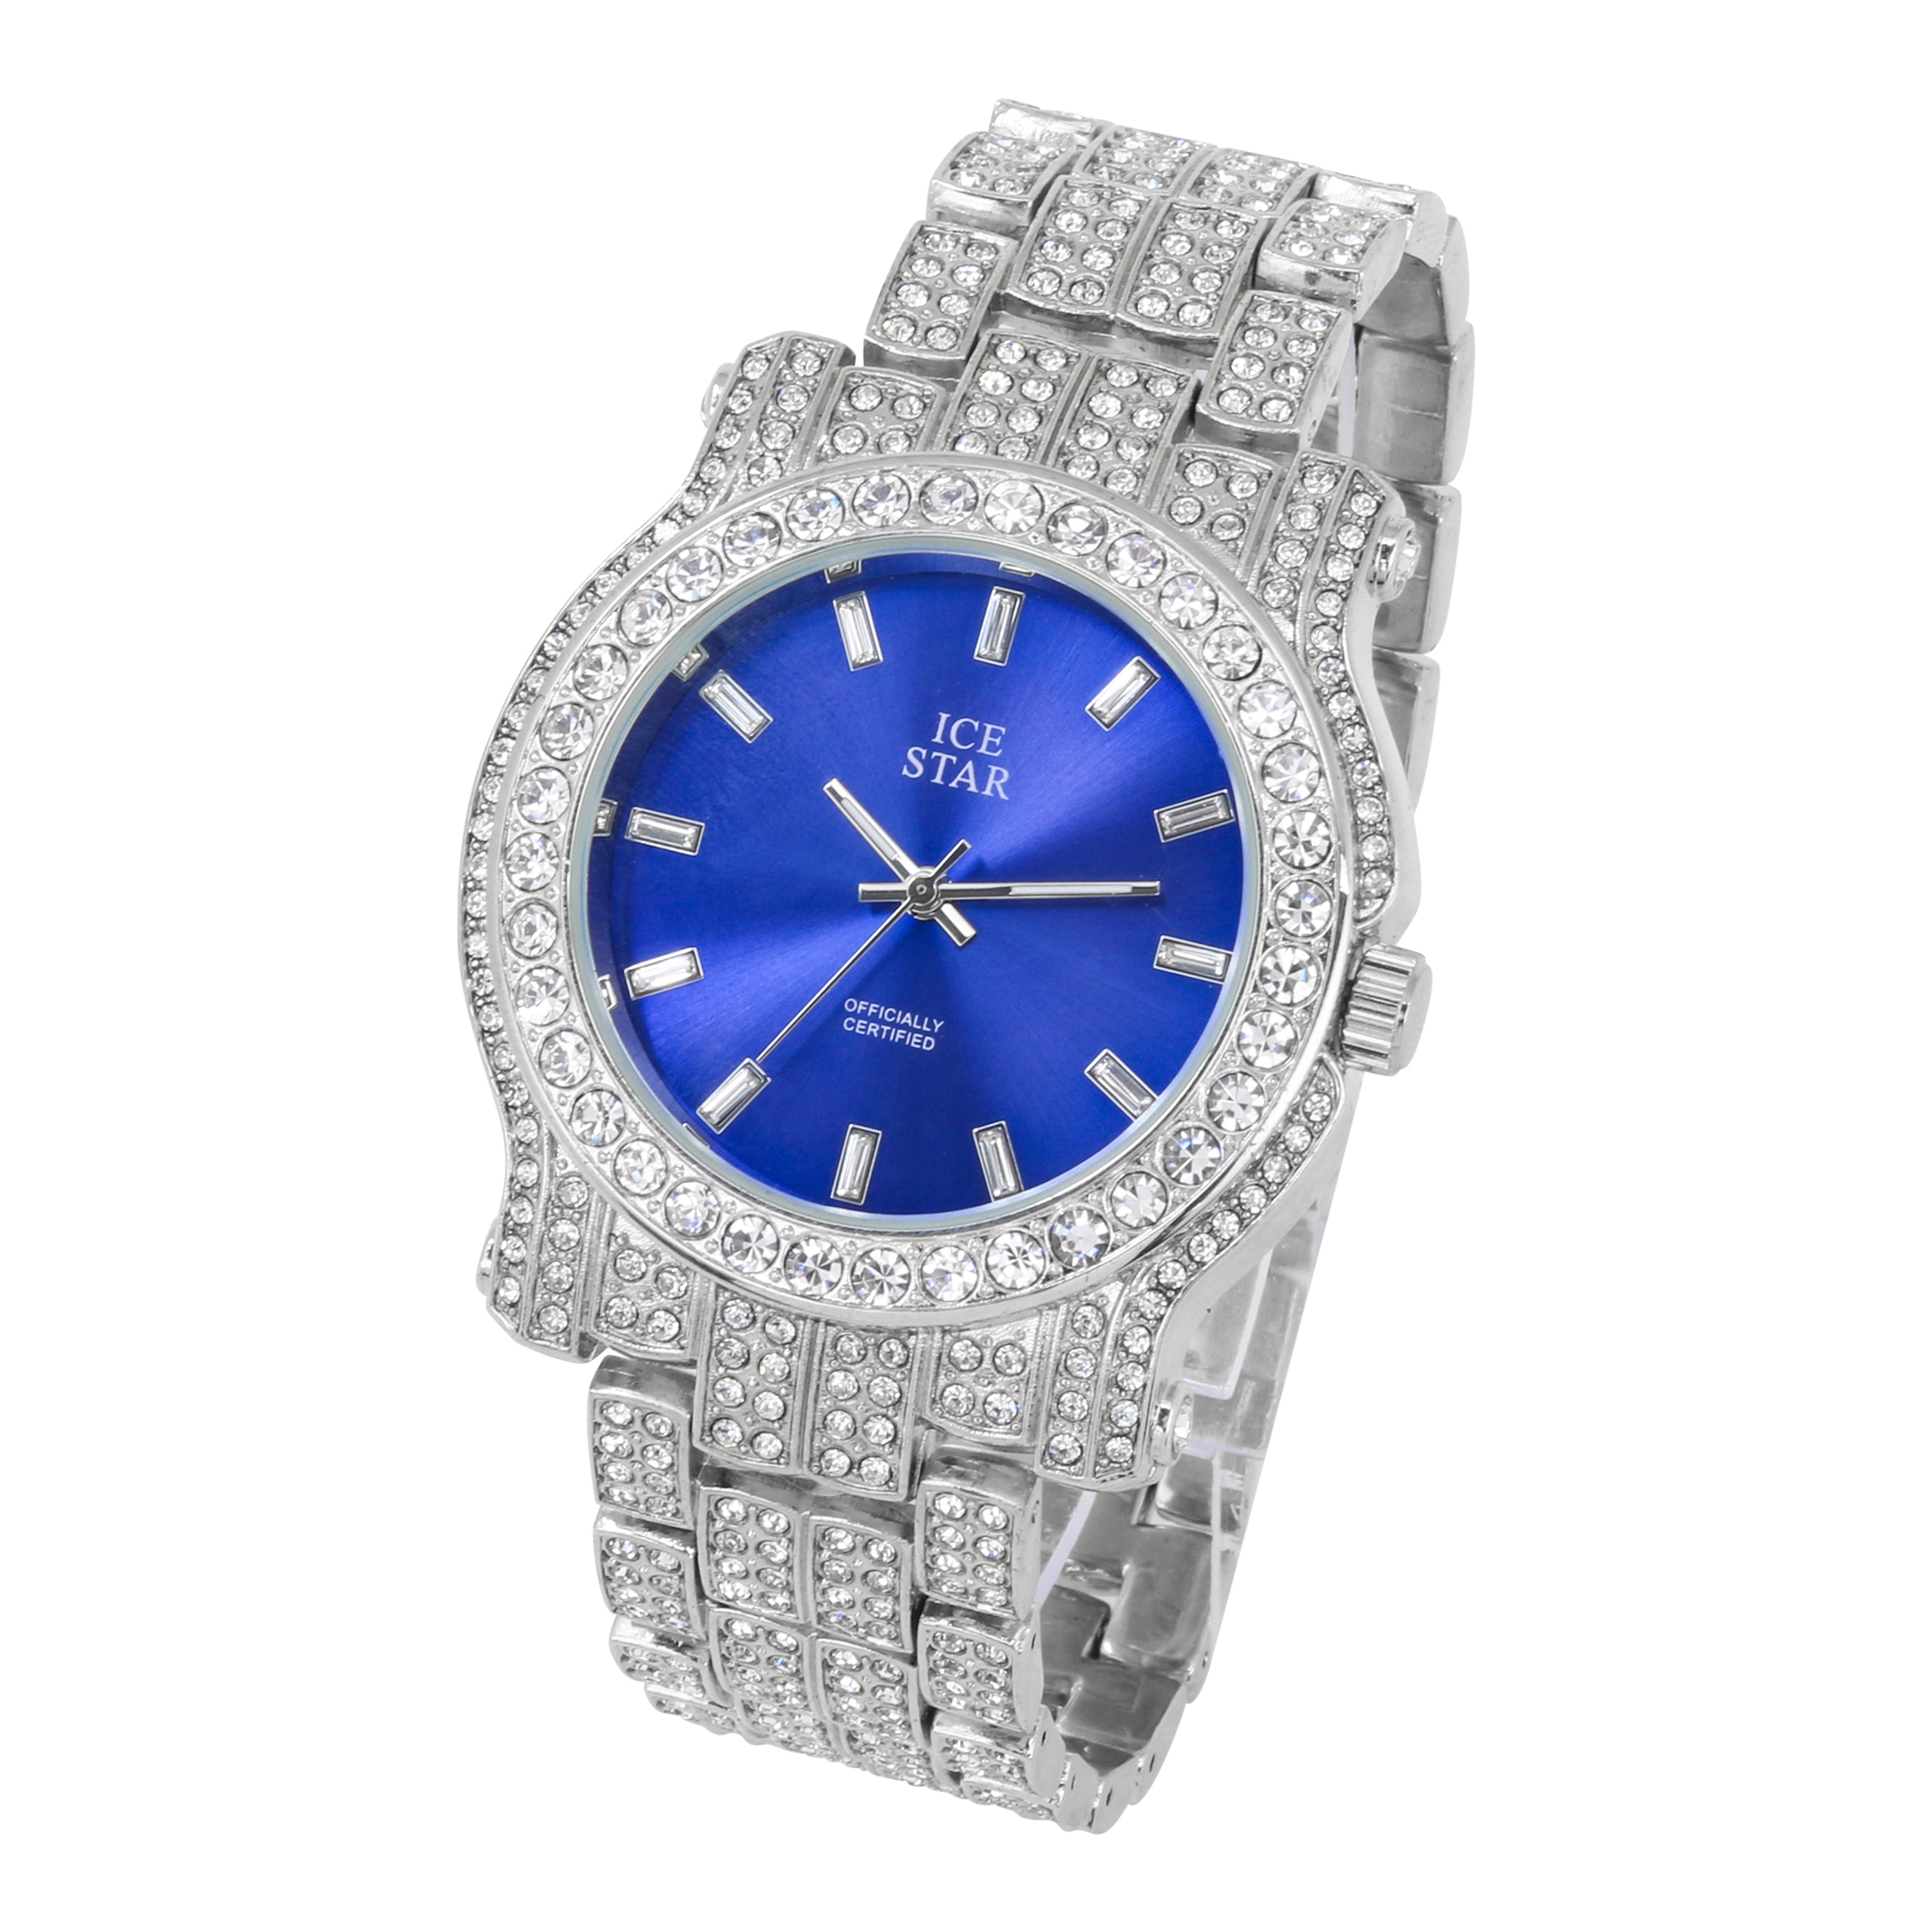 Men's Round Iced Out Watch 45mm Silver - Baguette Dial